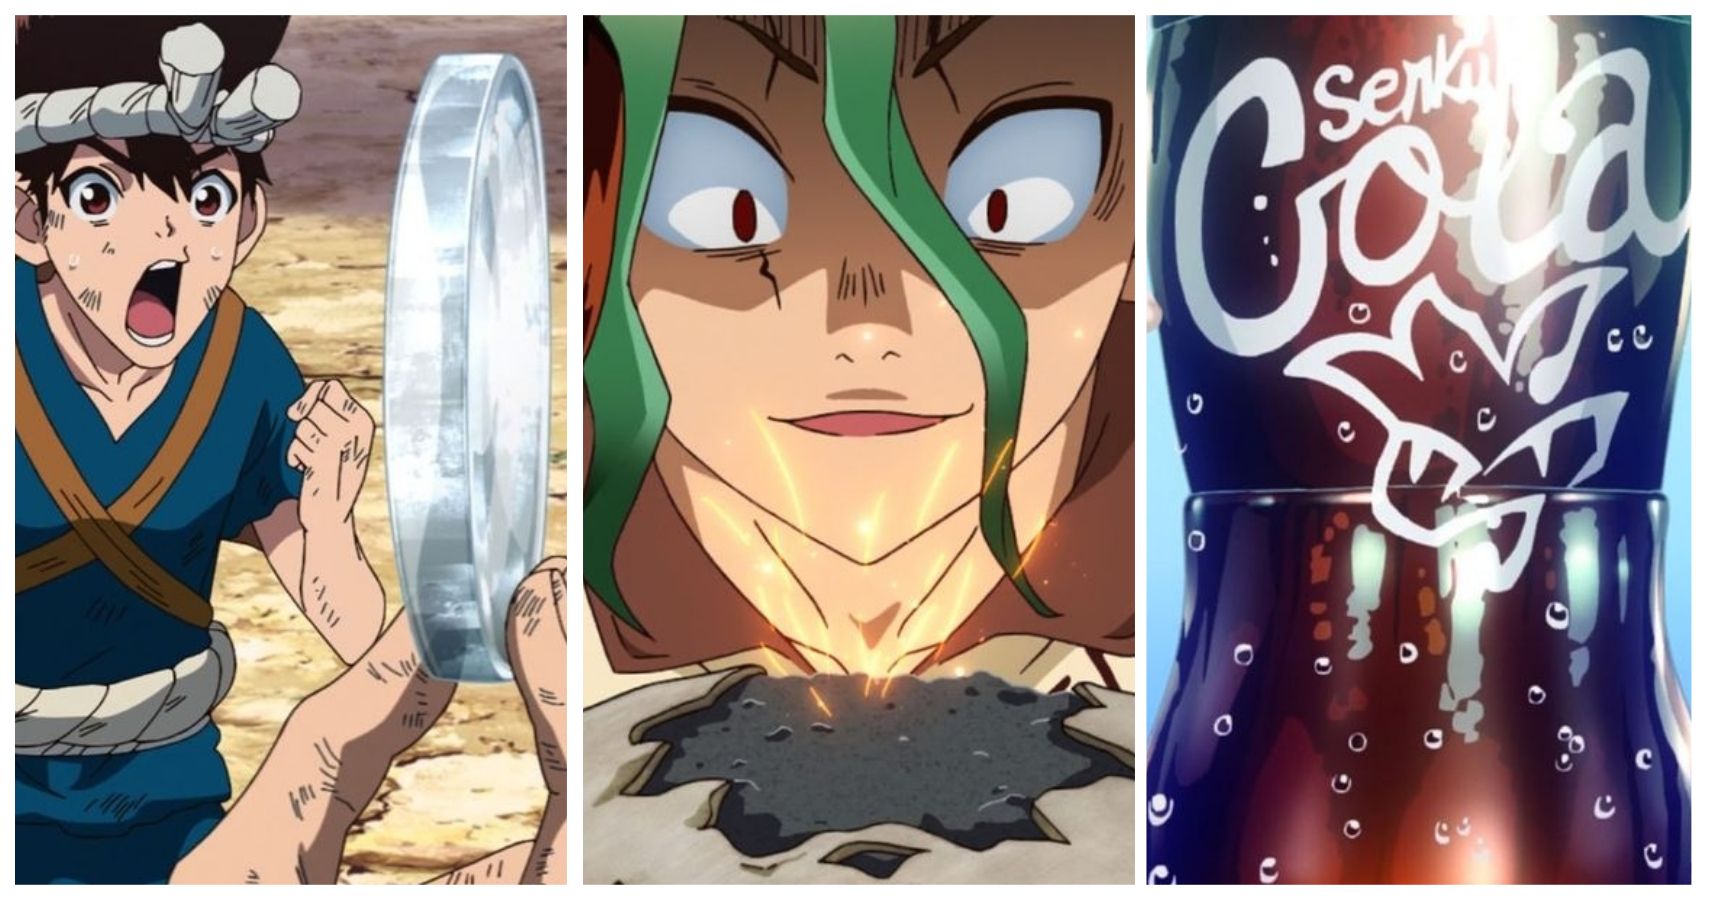 Dr. Stone: New World Episode 8 Review - I drink and watch anime